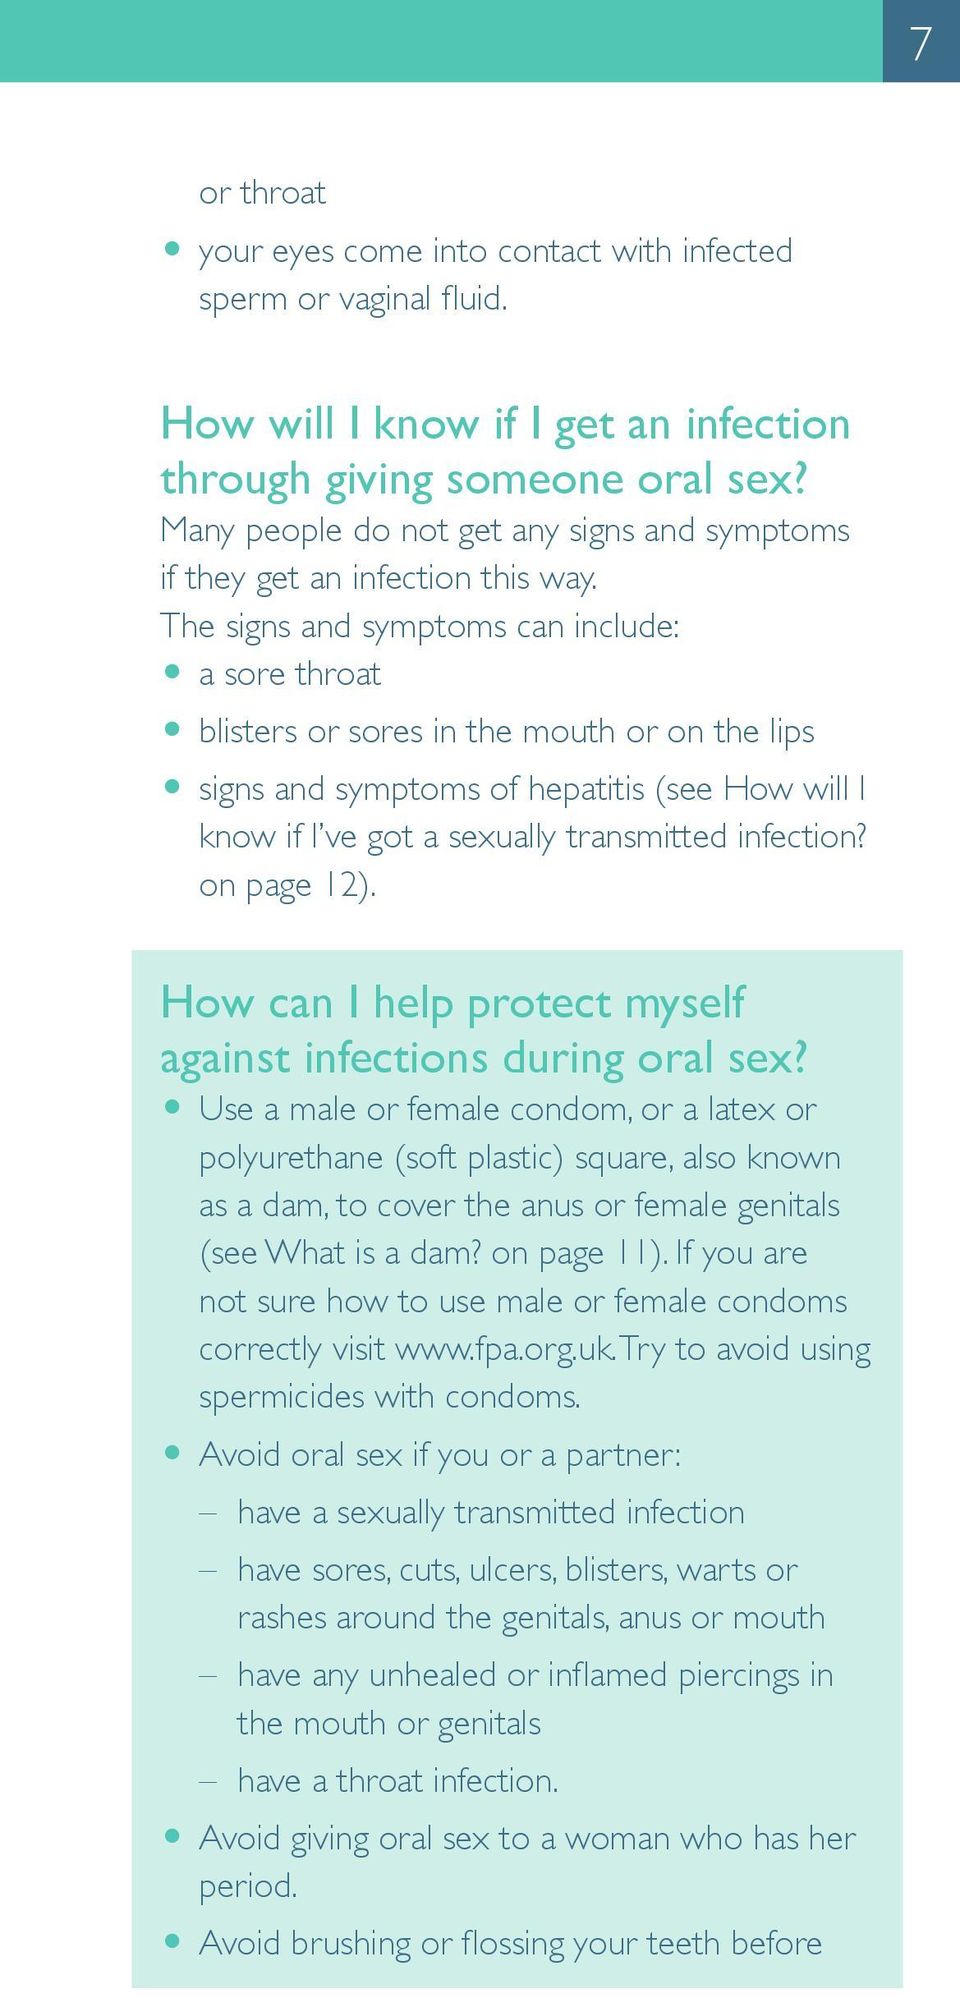 The signs and symptoms can include: O a sore throat O blisters or sores in the mouth or on the lips O signs and symptoms of hepatitis (see How will I know if I ve got a sexually transmitted infection?